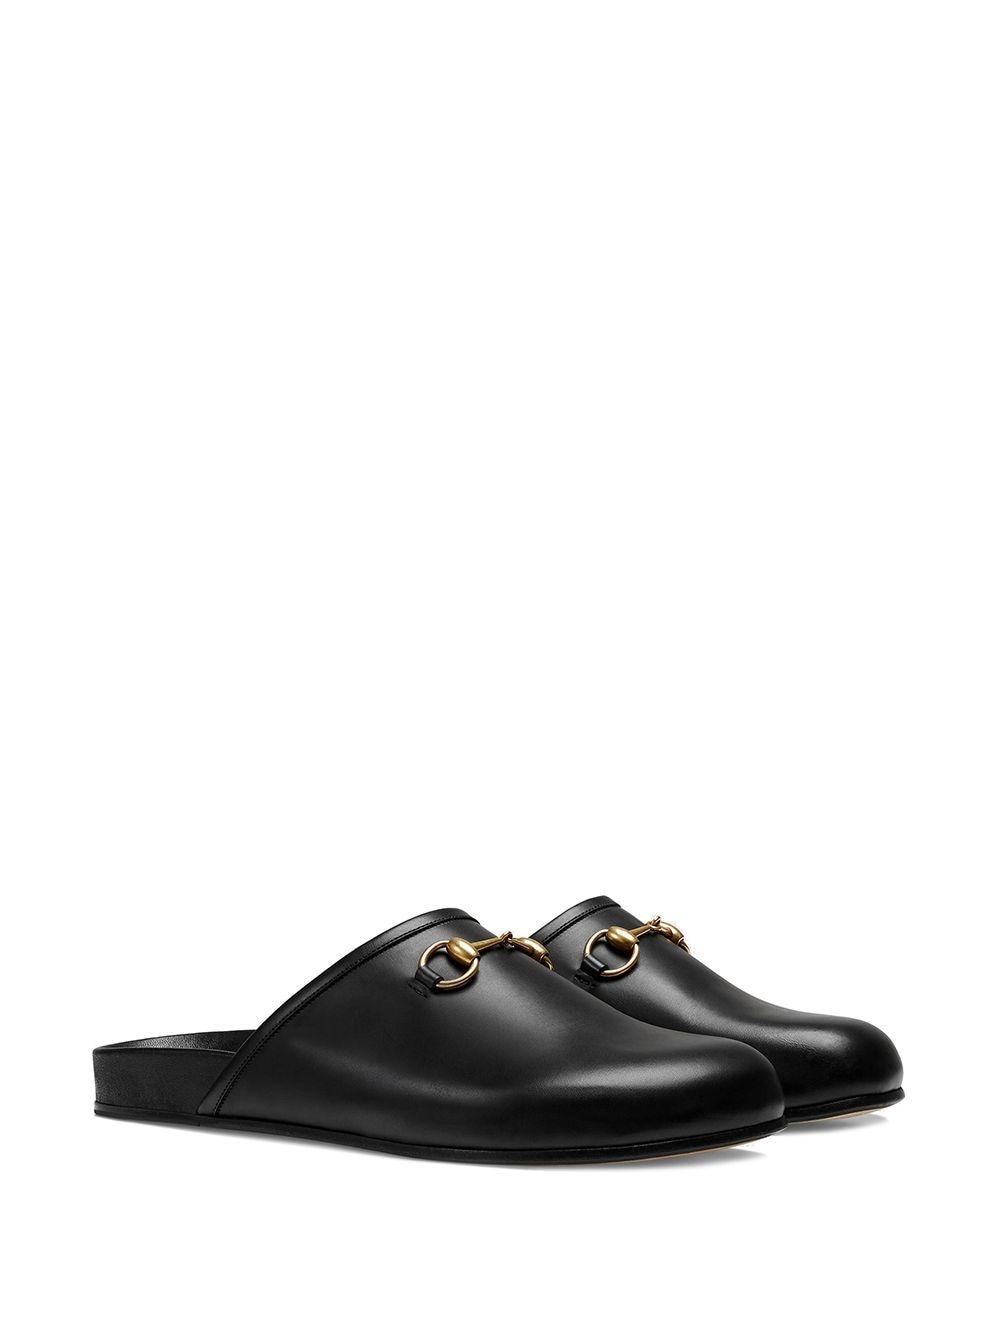 Gucci Horsebit Leather Slippers in Black for Men - Save 14% - Lyst